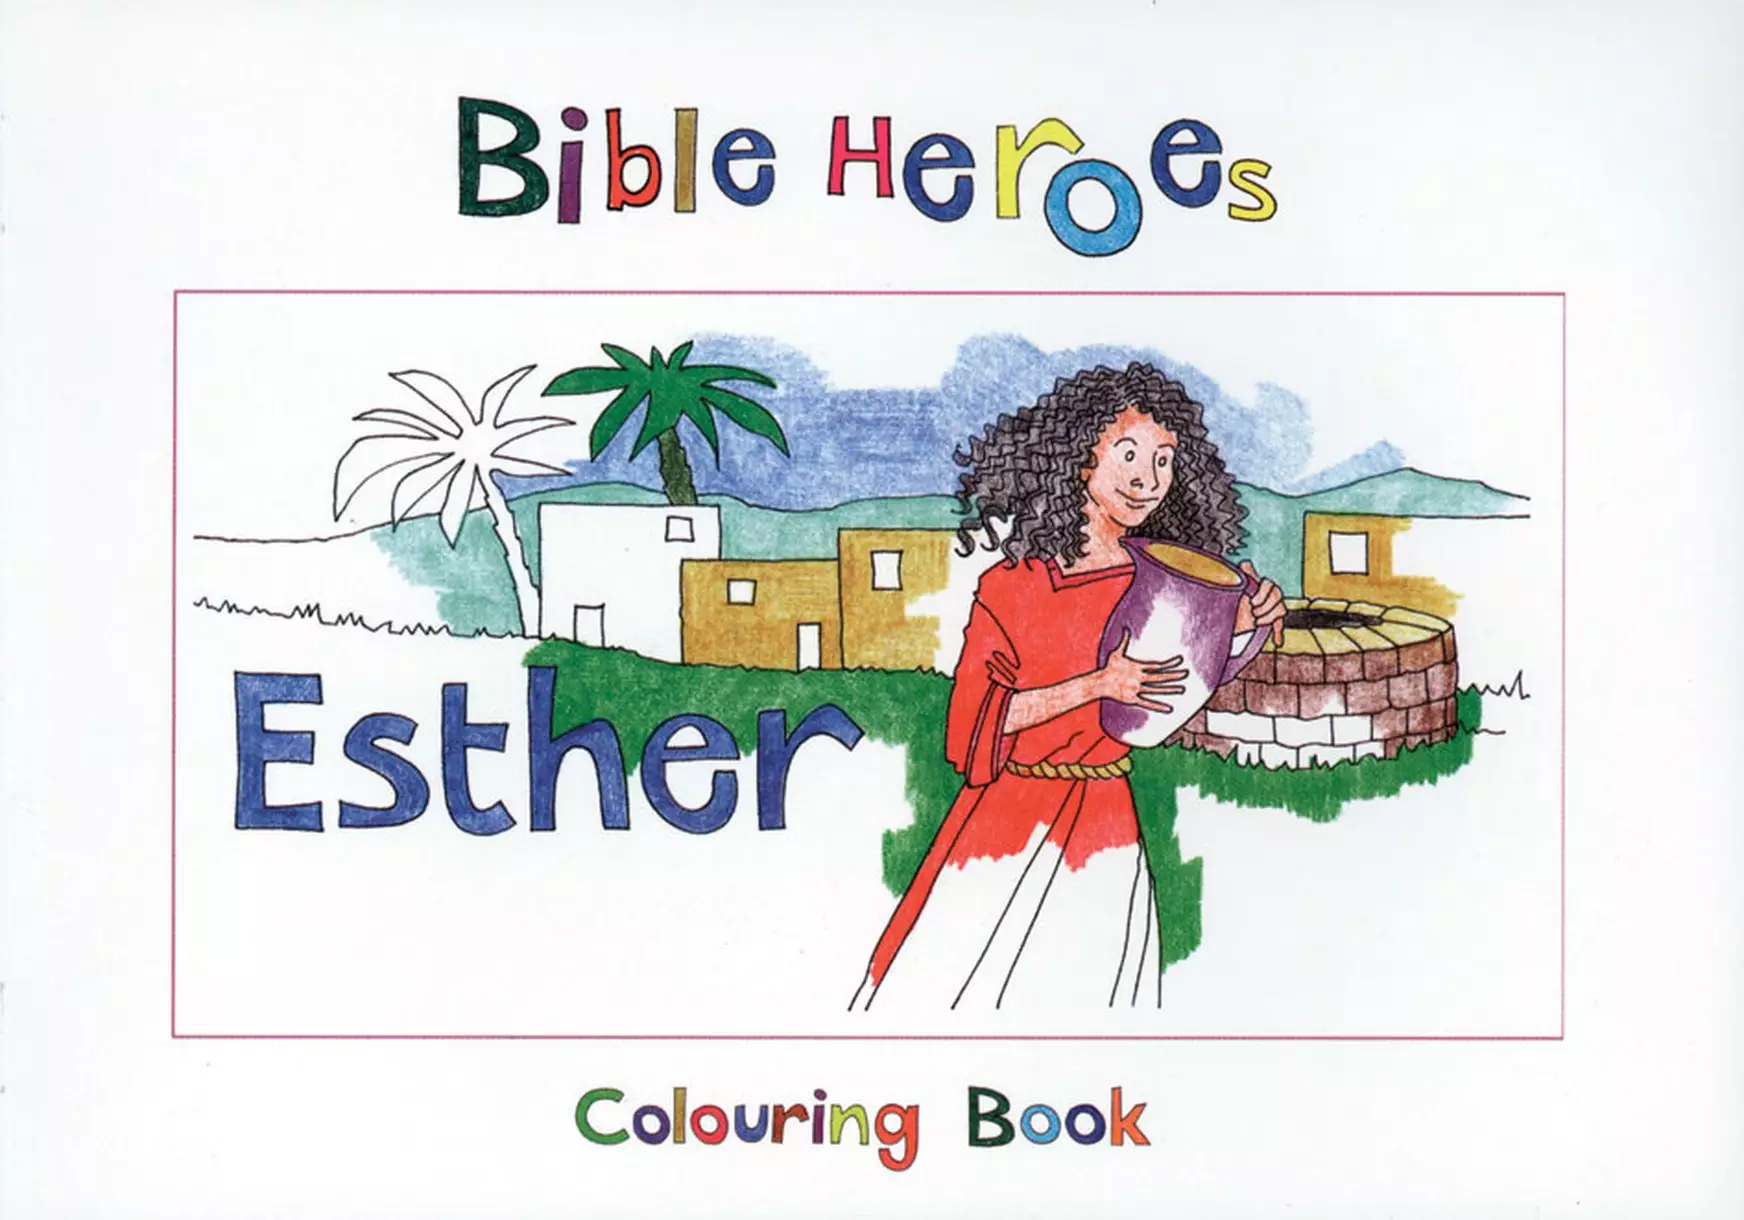 Bible Heroes - Esther